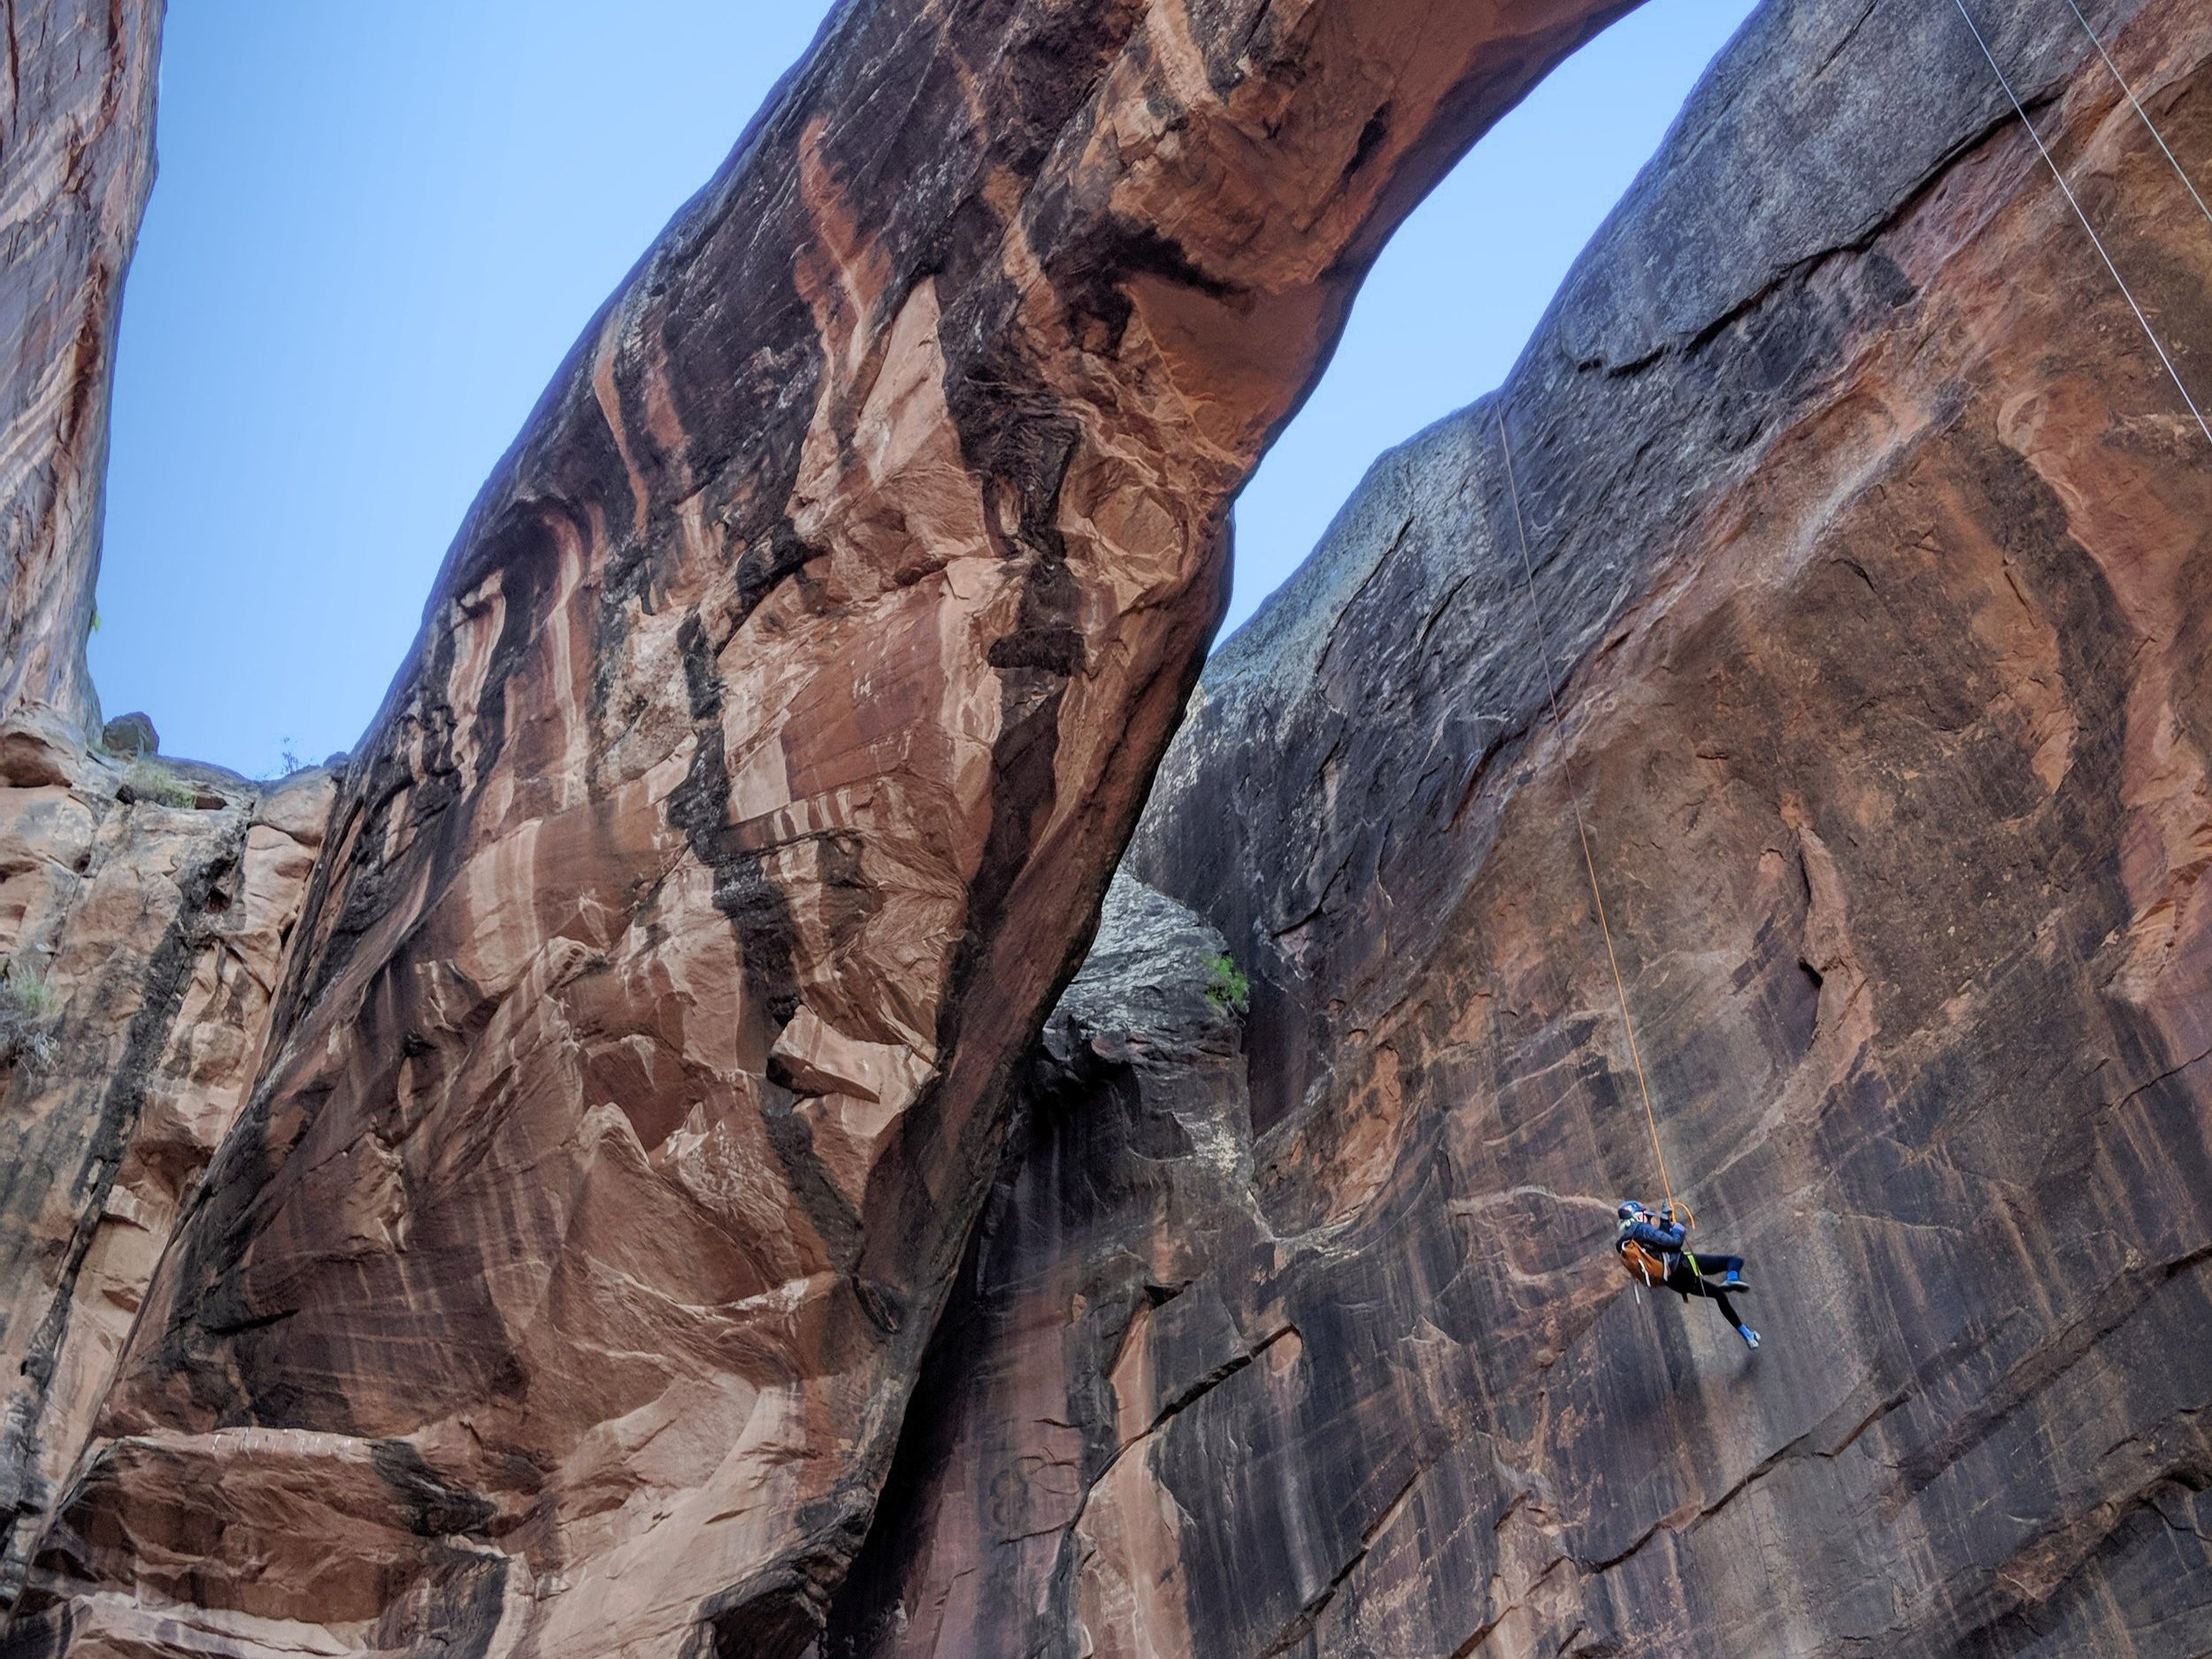 The Southwest is Filled with Unbelievable Canyoneering Routes